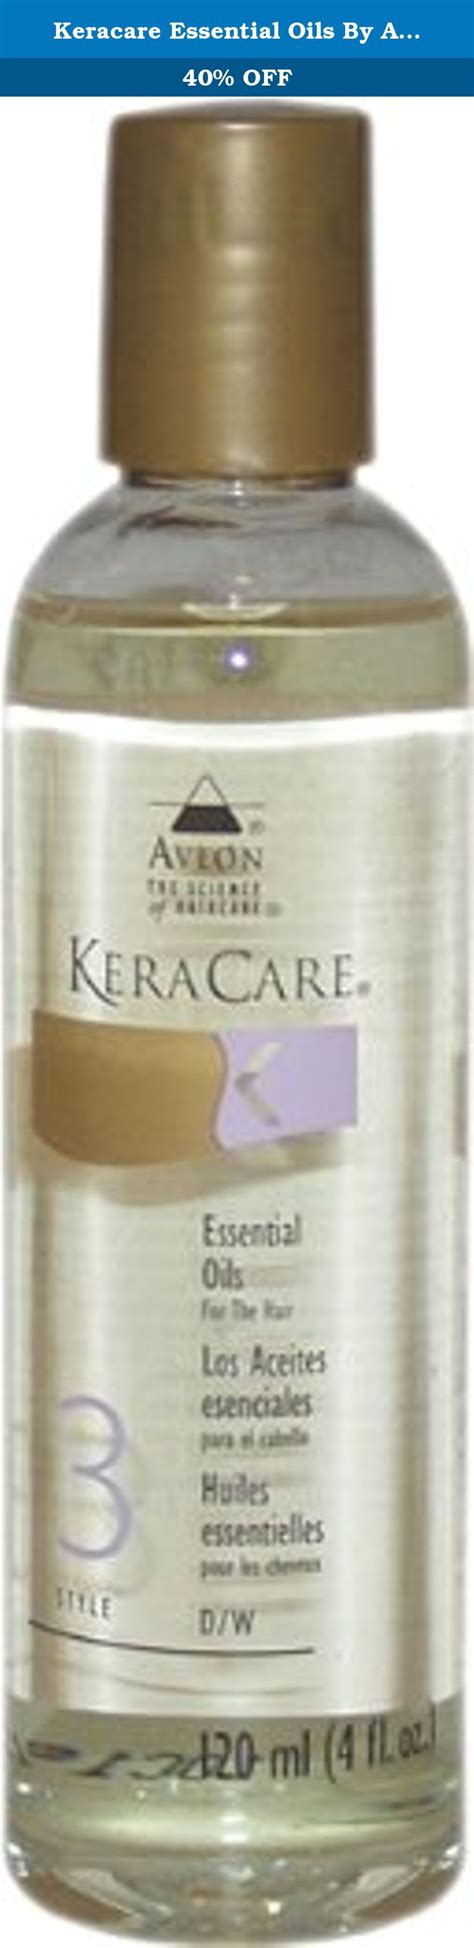 Contains a conditioning blend of olive oil, carrot oil, and herbal extracts. Keracare Essential Oils By Avlon for Unisex Oil, 4 Ounce ...